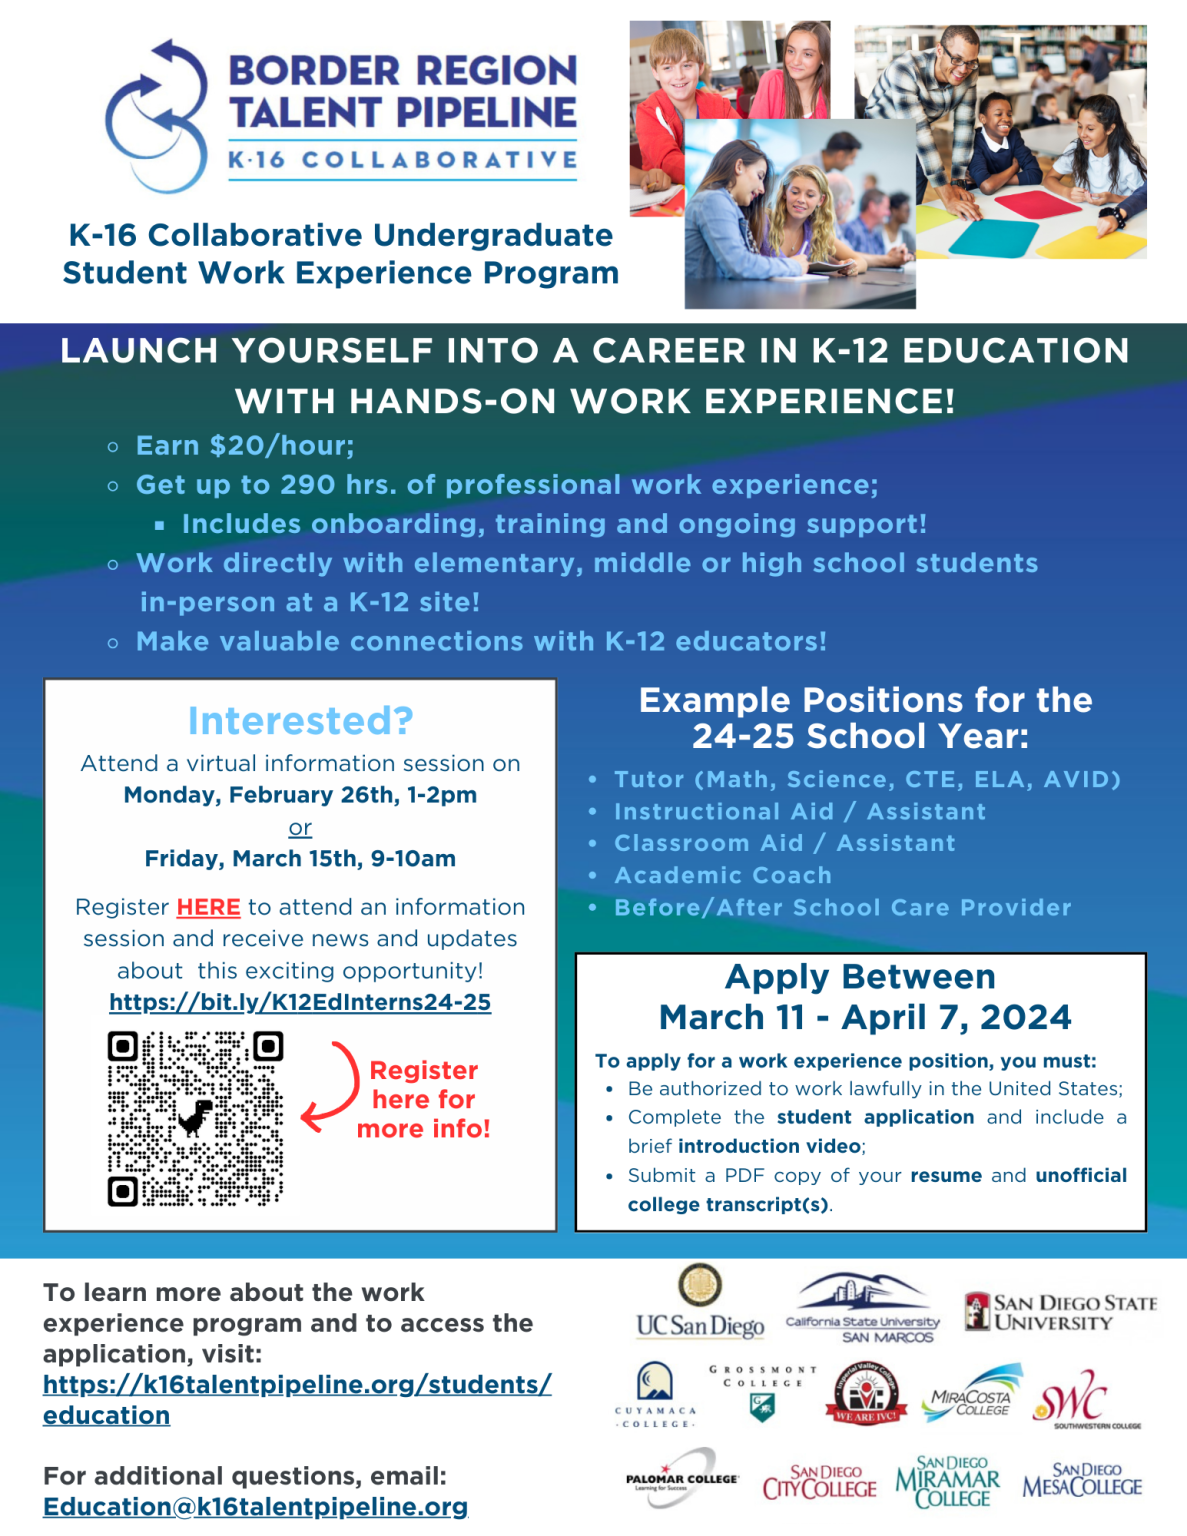 Register for more information on the Education Work Experience Program!